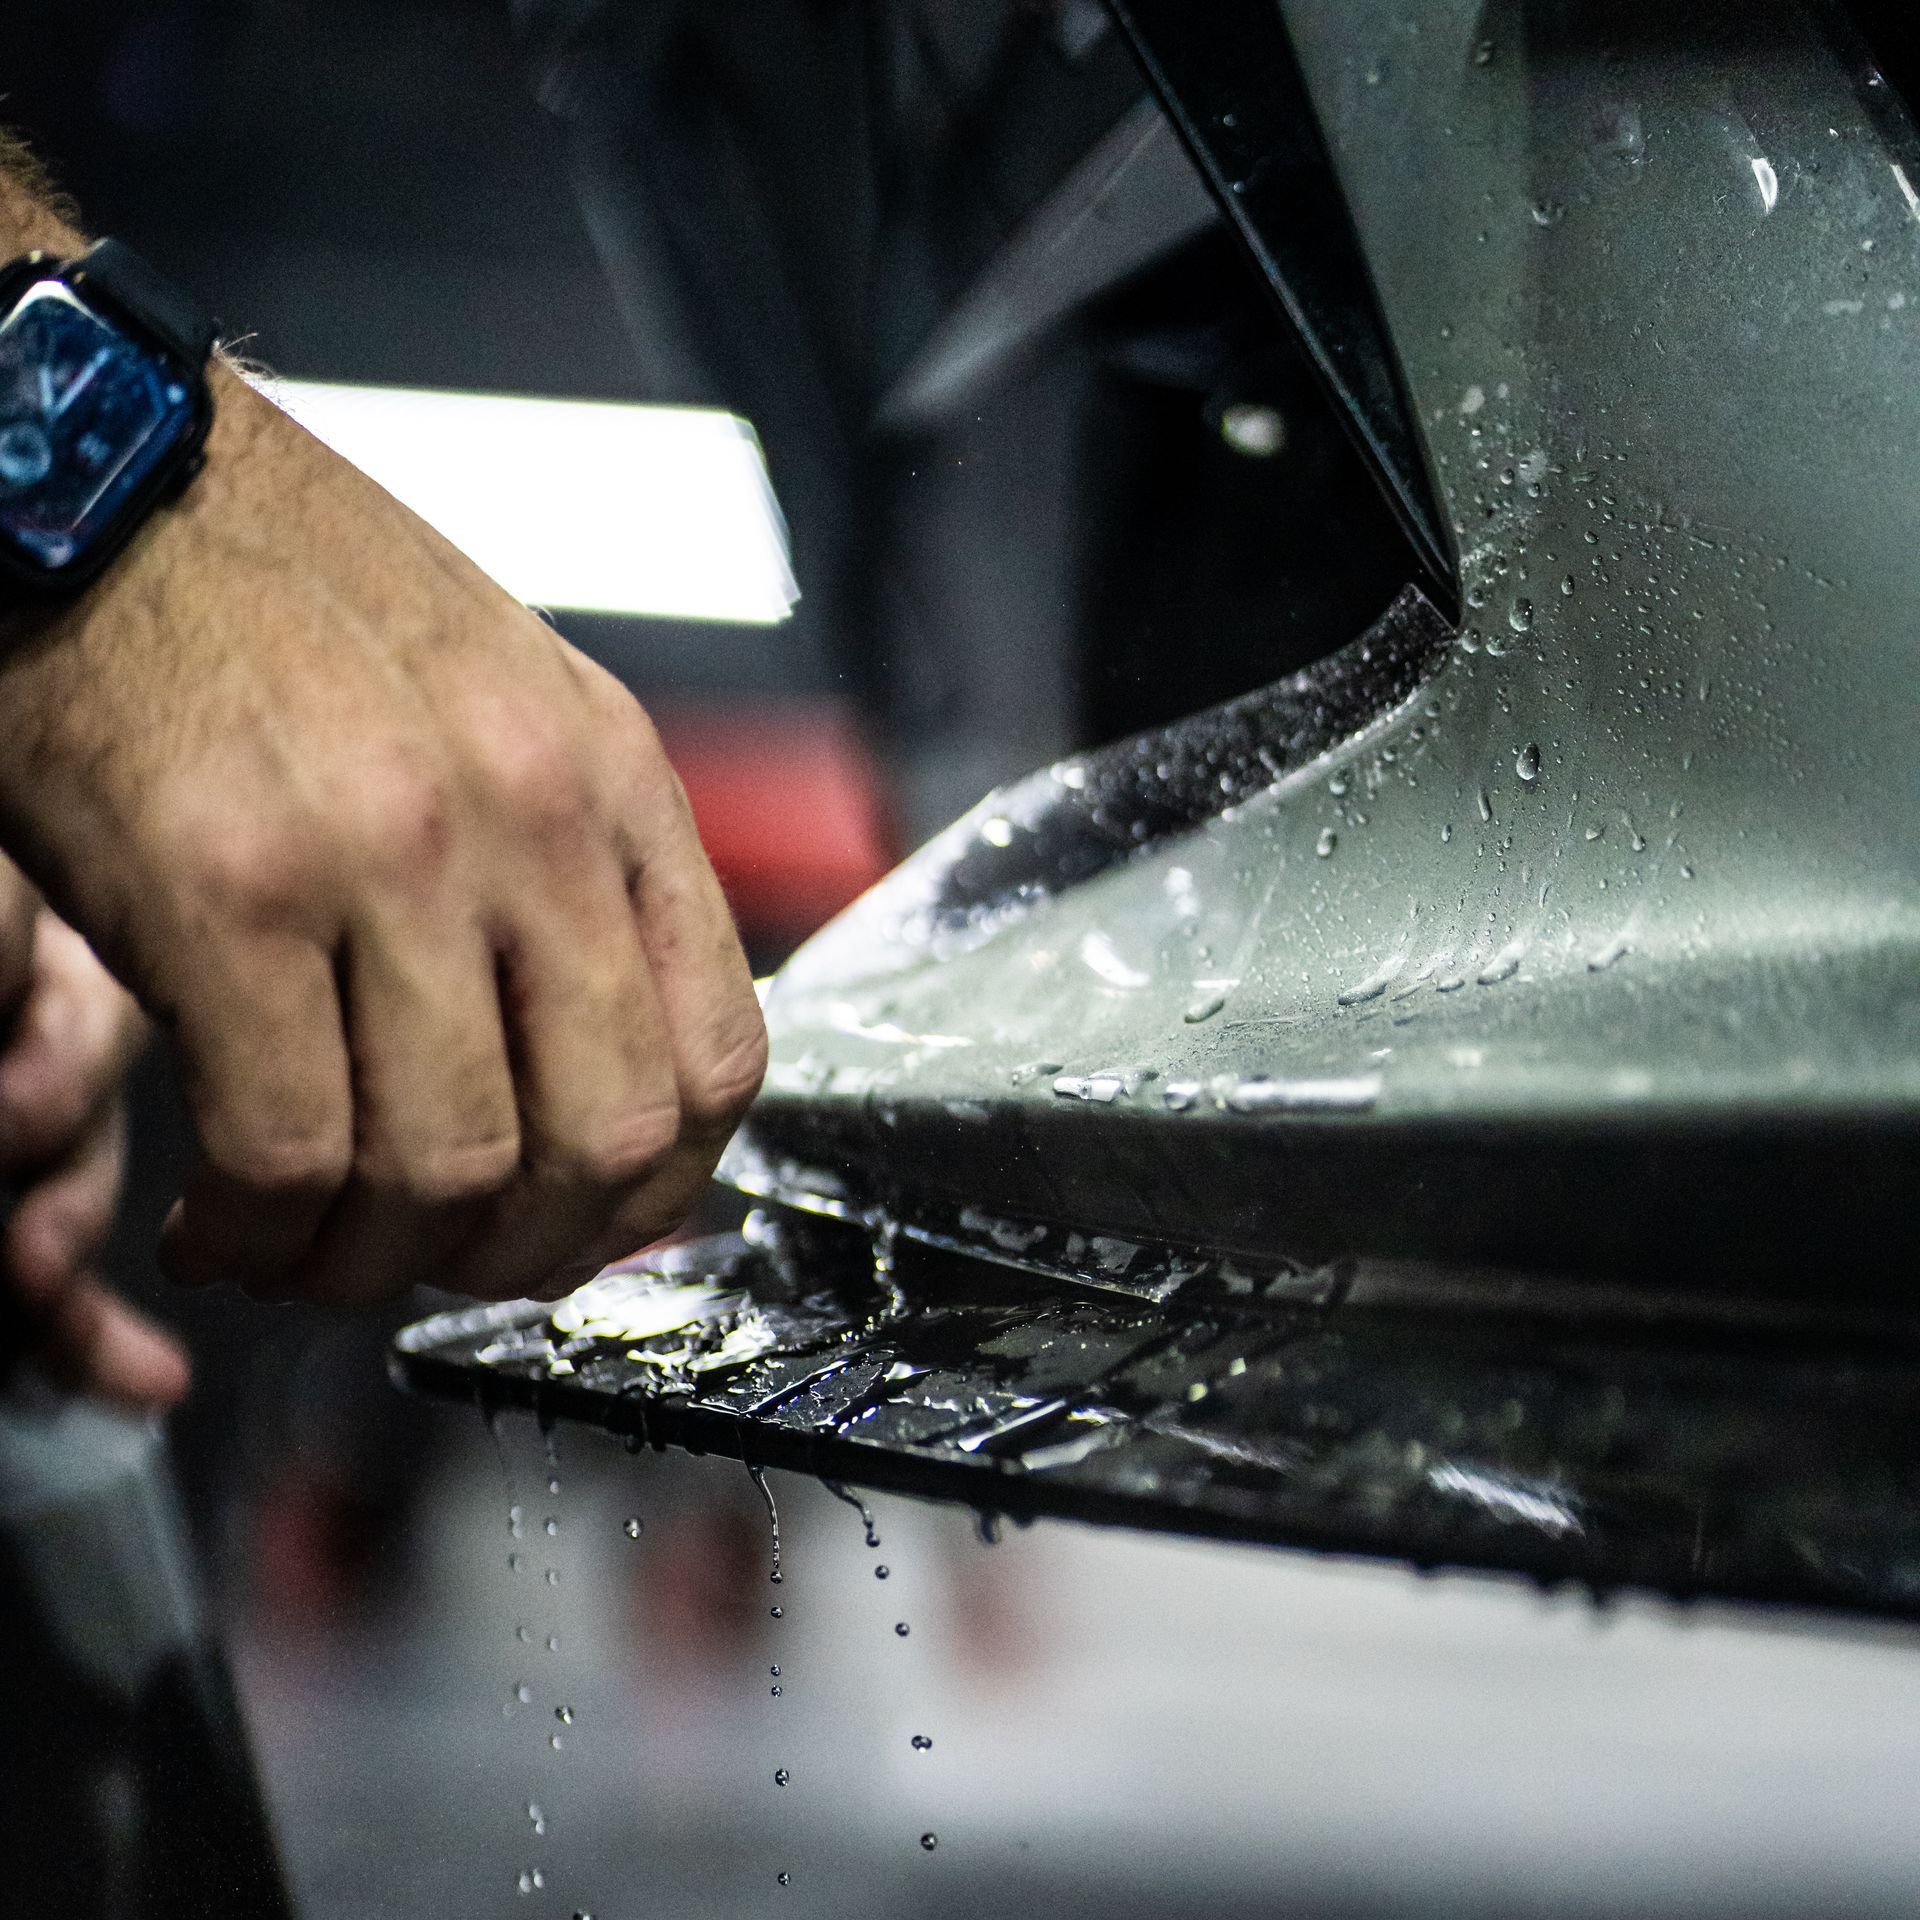 A man wearing a watch is cleaning a car